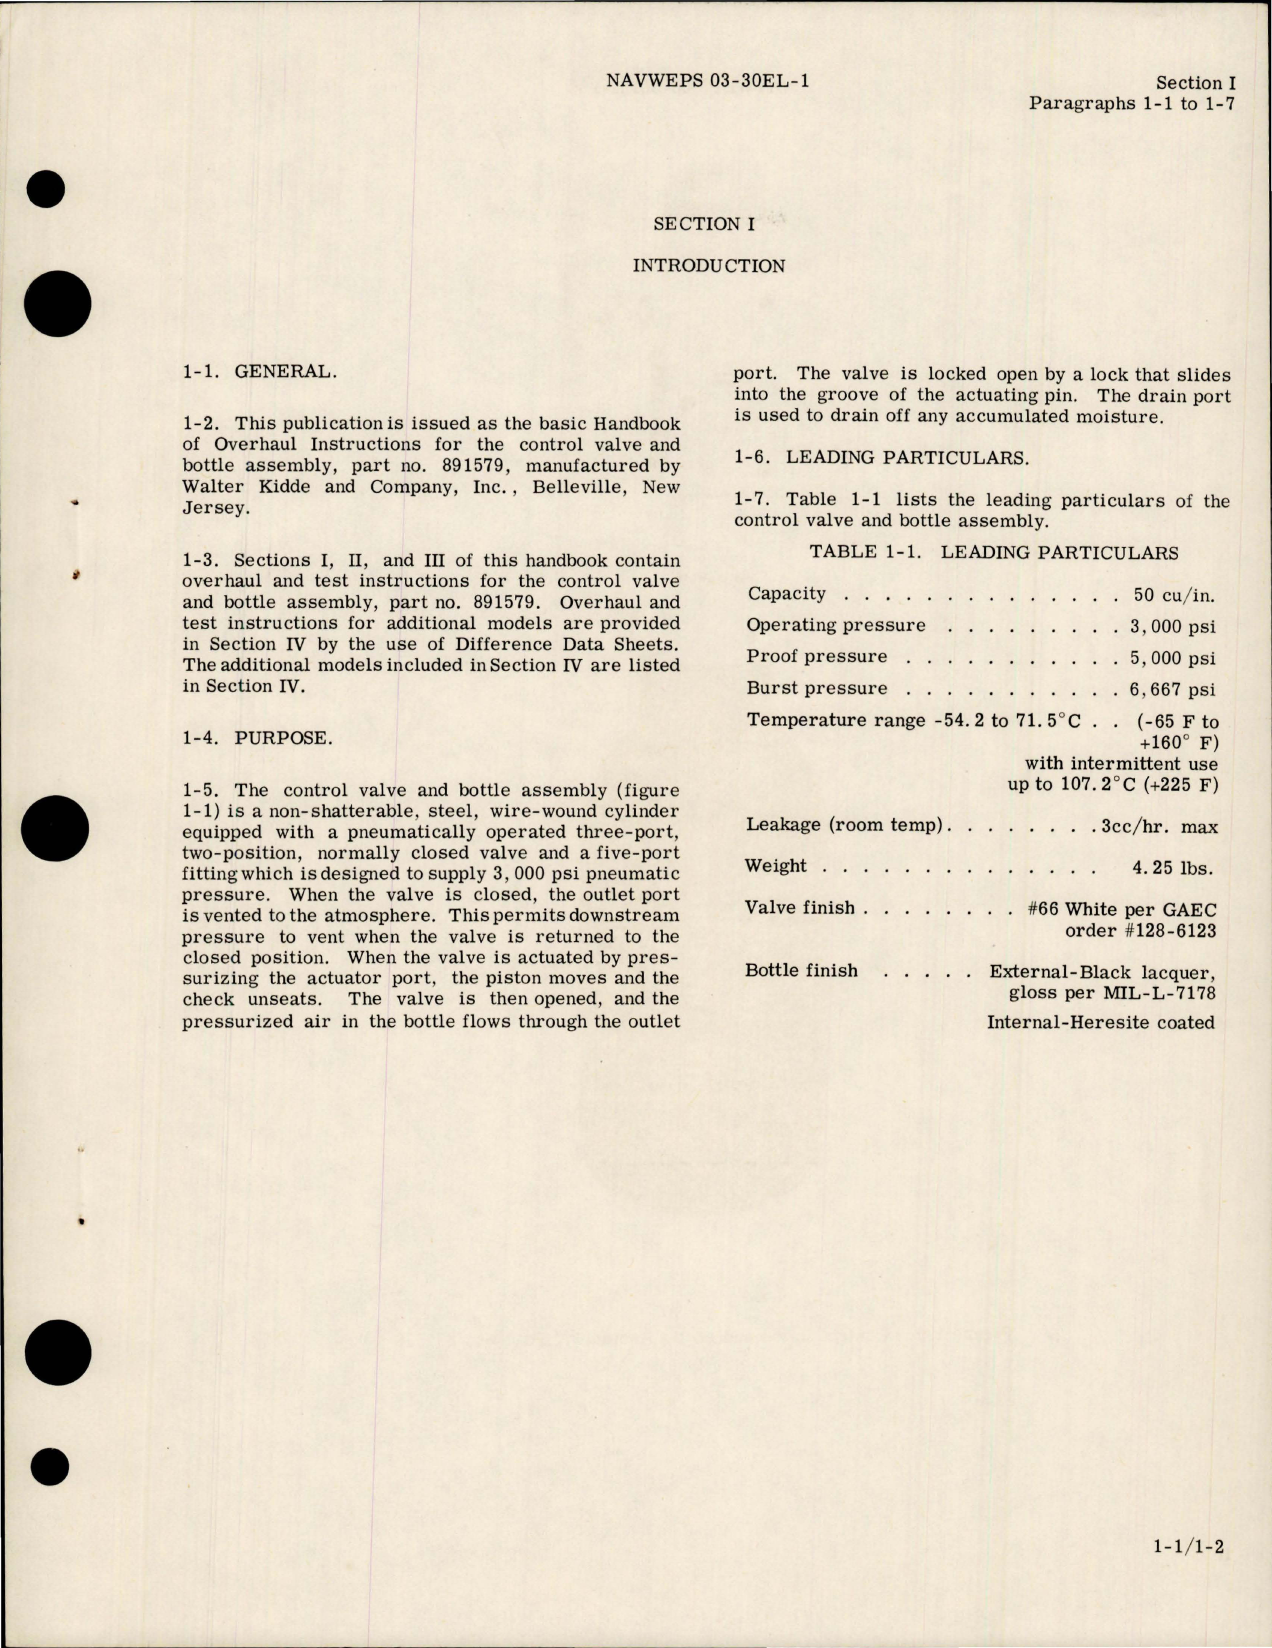 Sample page 5 from AirCorps Library document: Overhaul Instructions for Control Valve and Bottle Assembly - Part 891579 